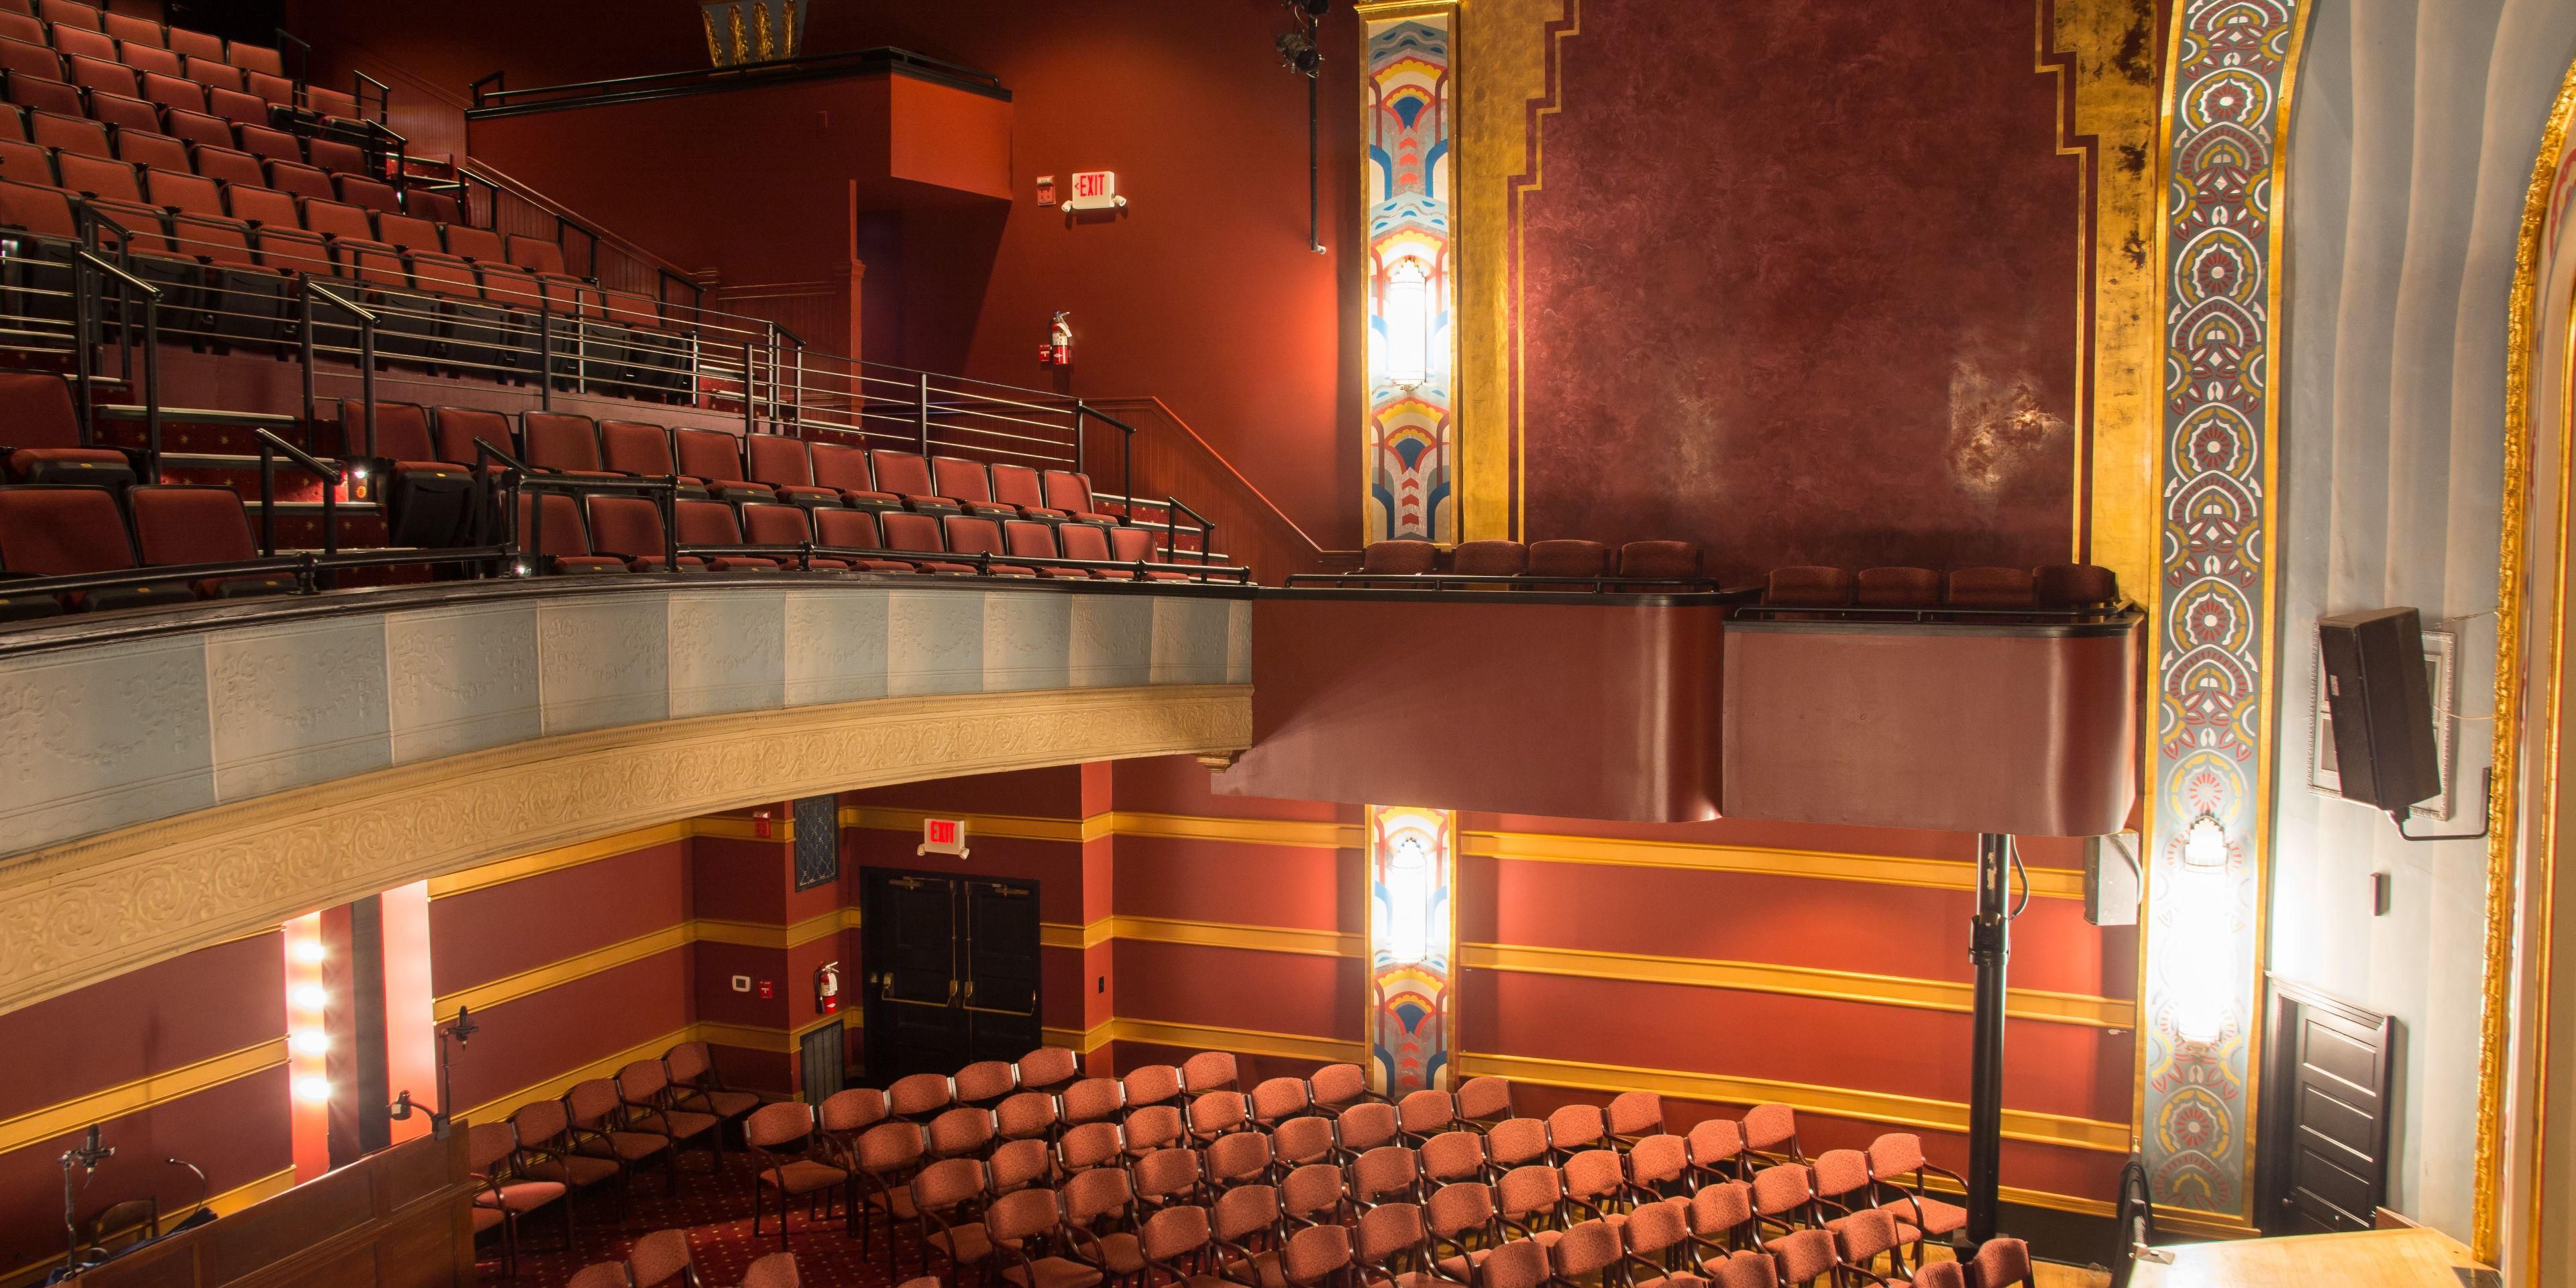 Come and enjoy a show at the Historic Avalon Theater! Call us today to make your hotel reservation!